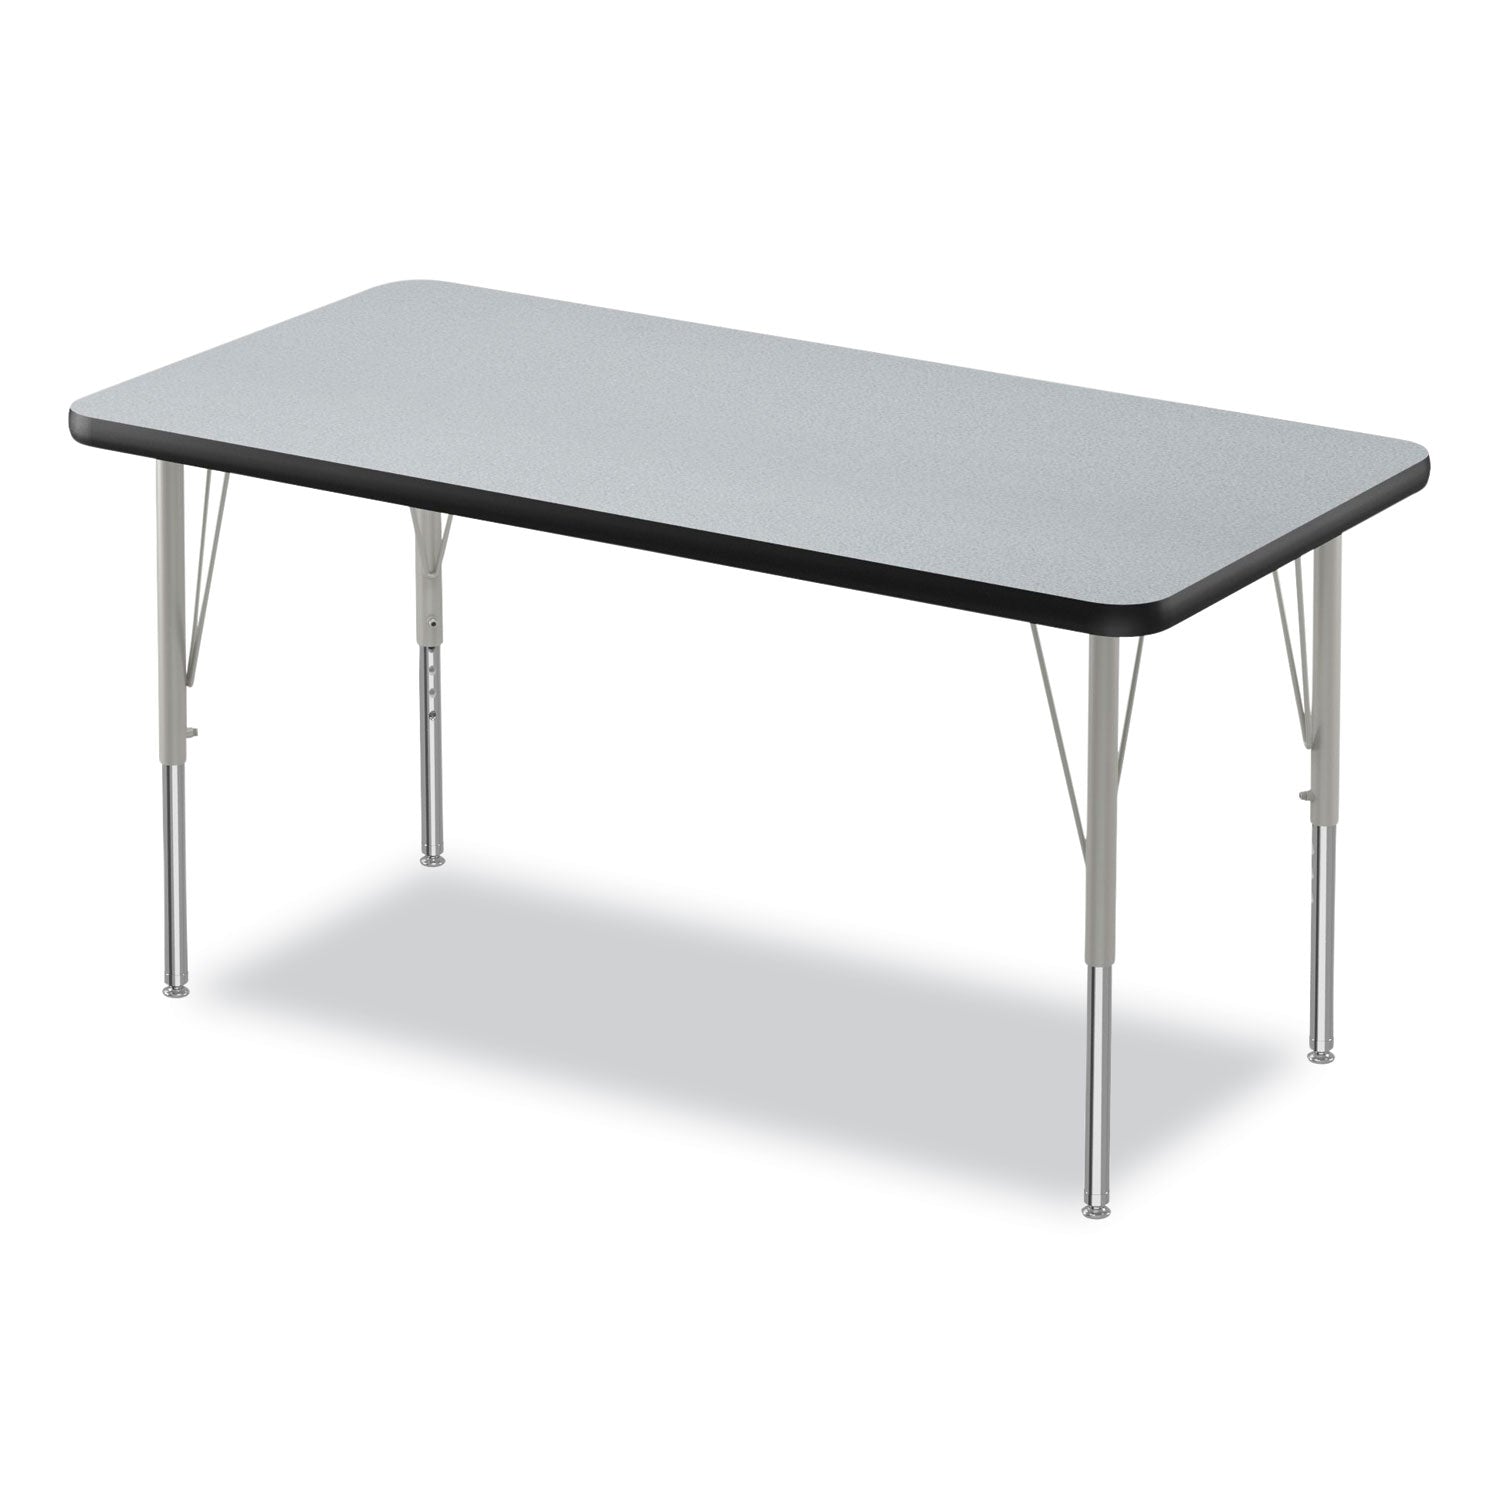 height-adjustable-activity-tables-rectangular-48w-x-24d-x-10h-gray-granite-4-pallet-ships-in-4-6-business-days_crl2448tf15954p - 1